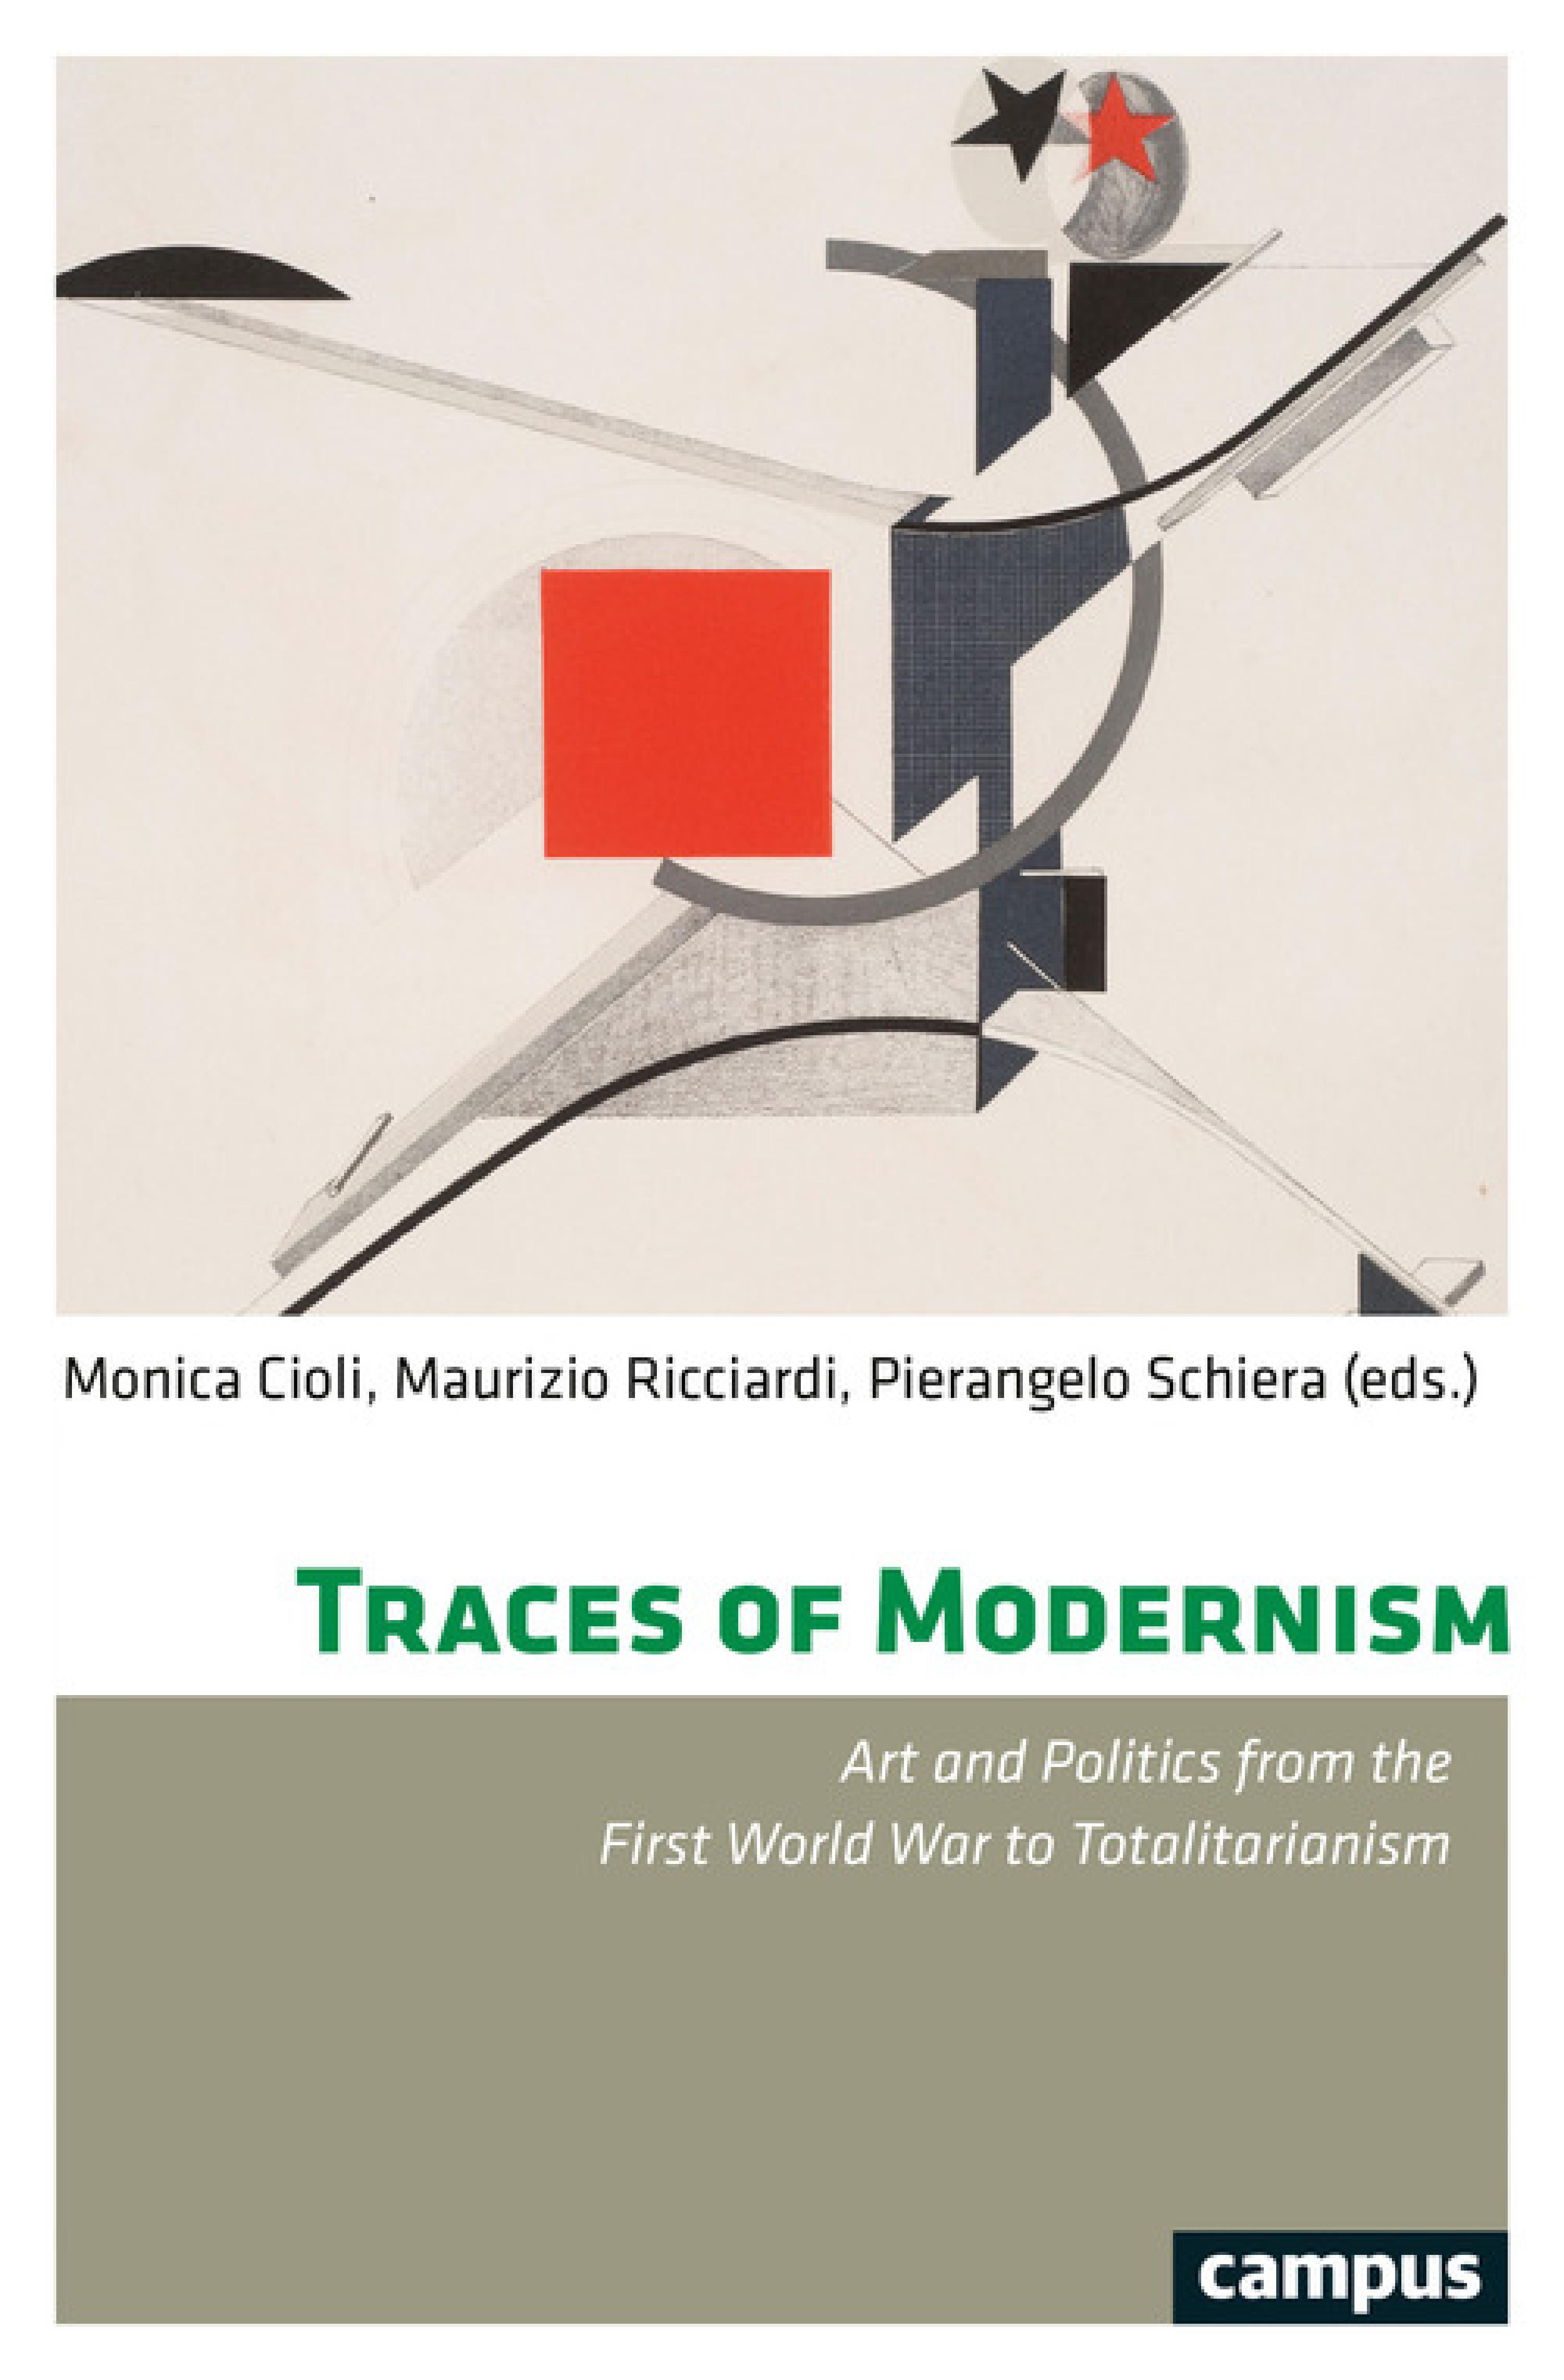 Traces of Modernism